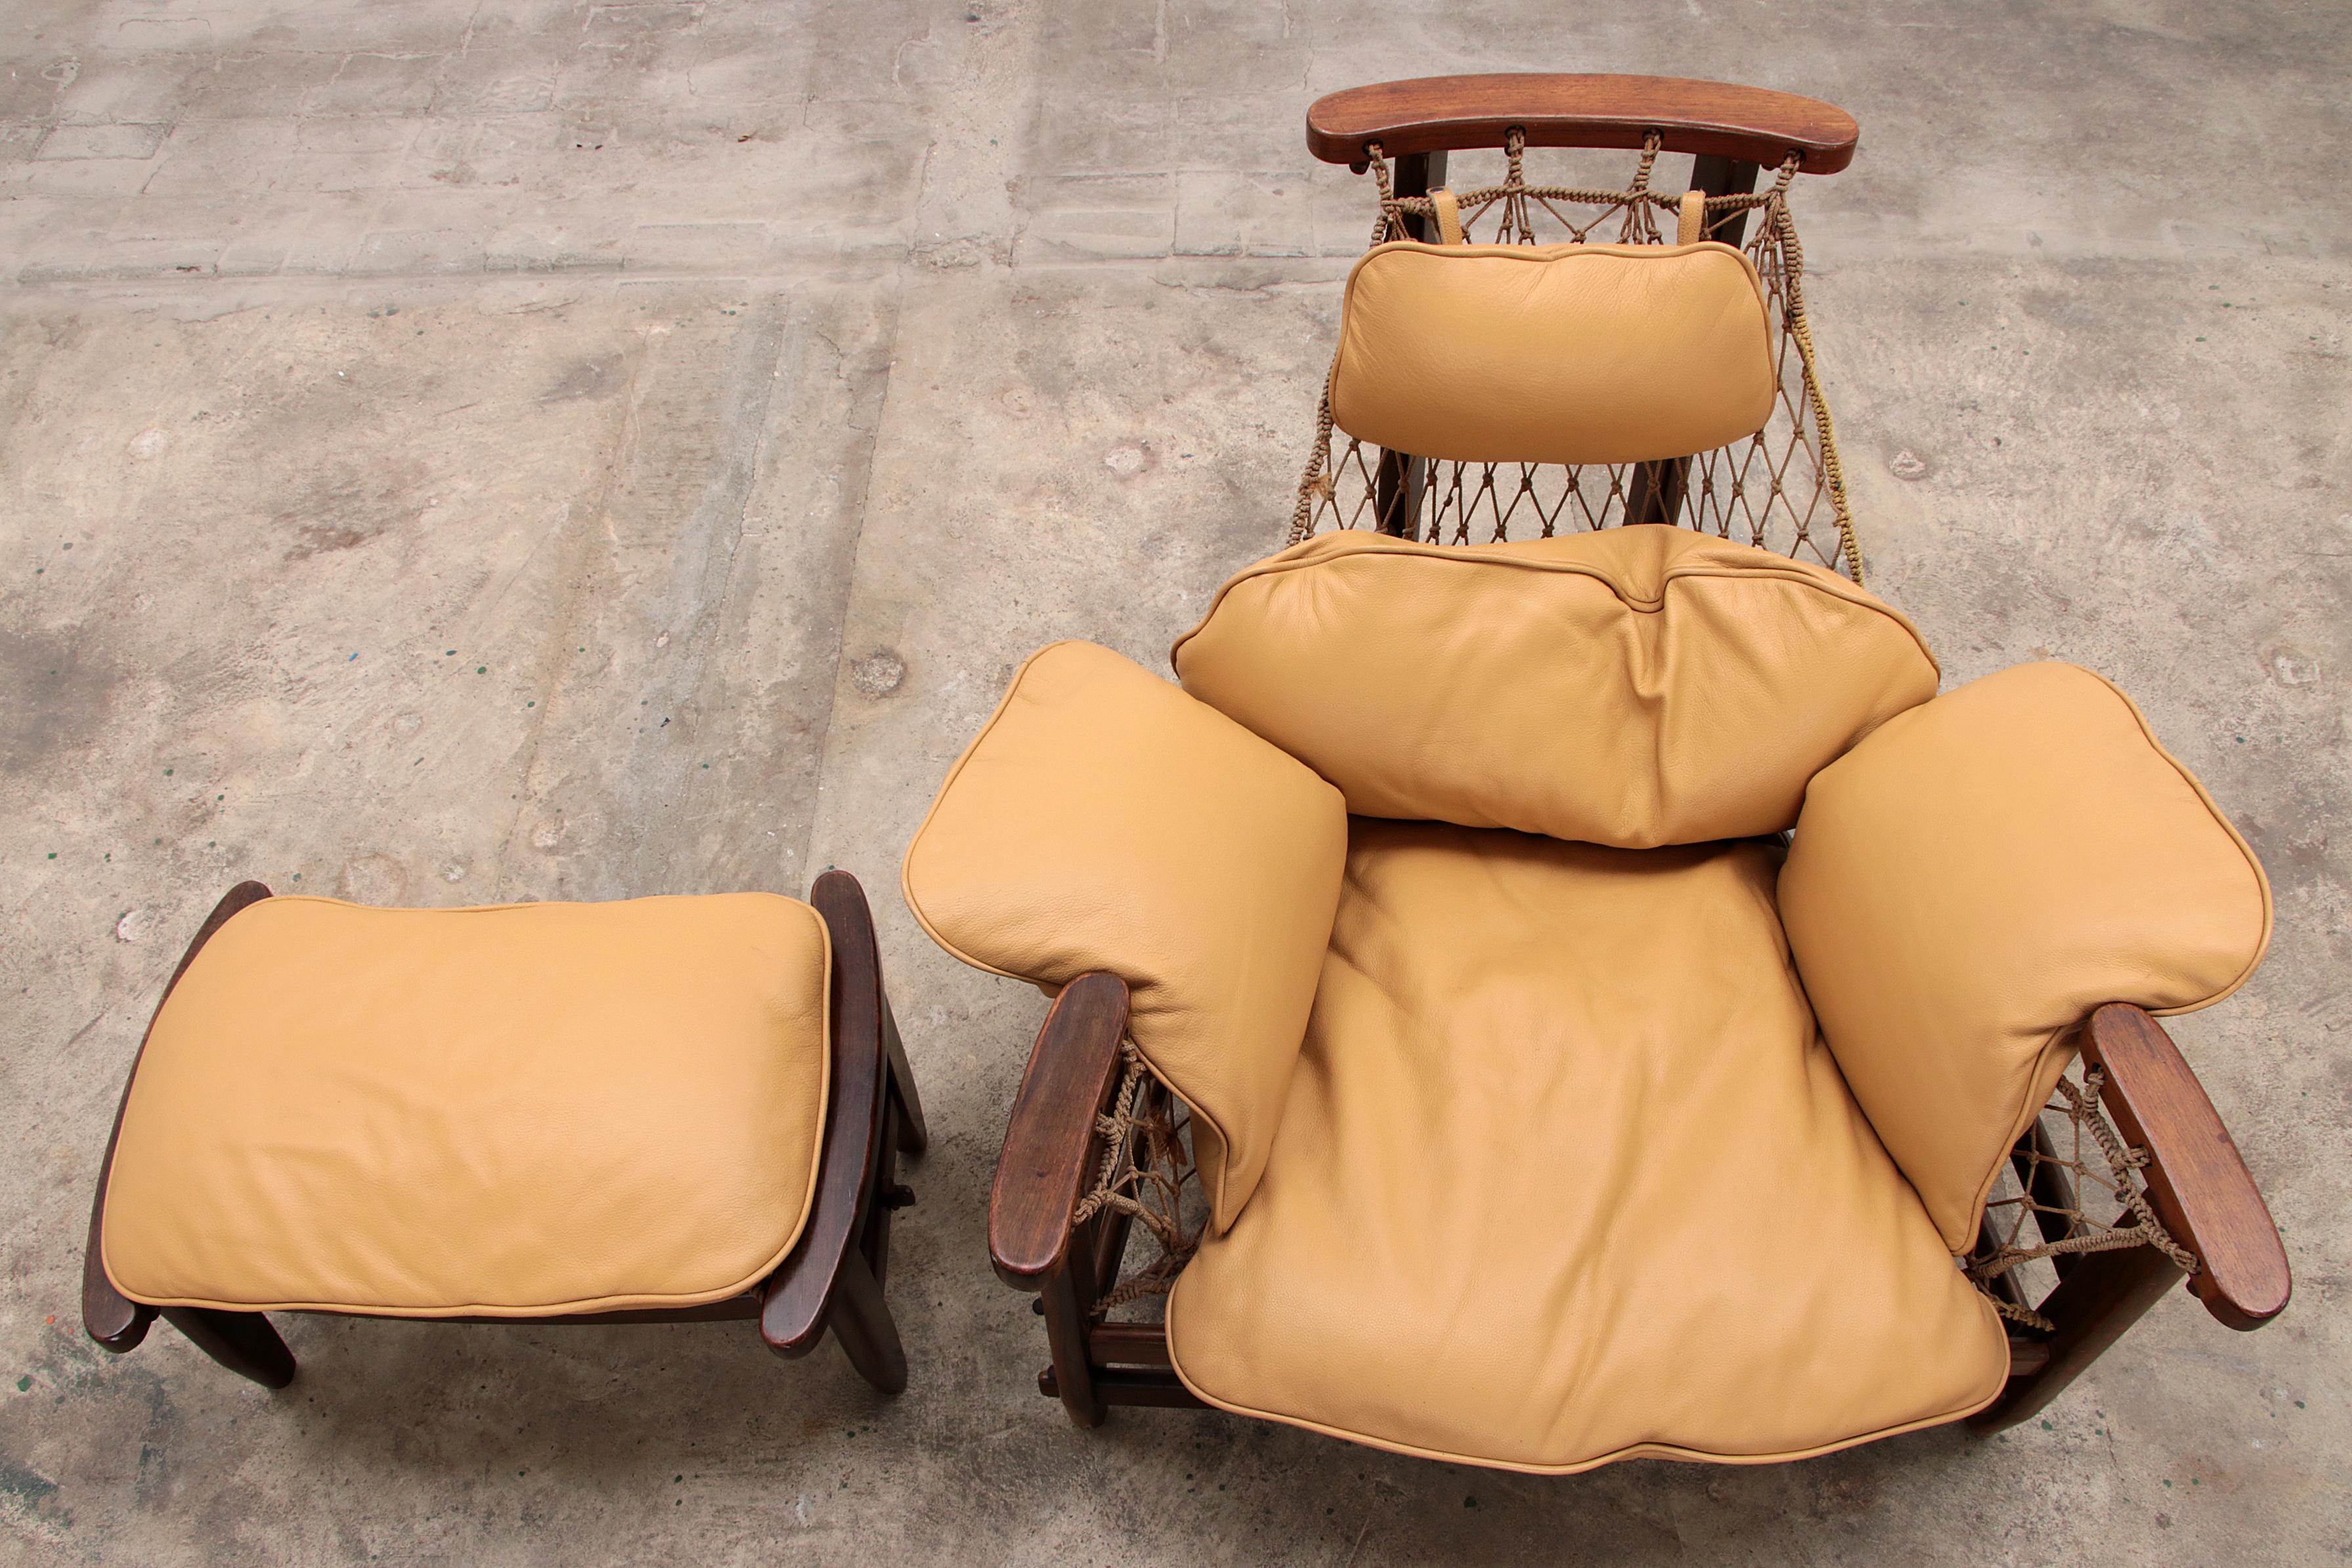 Jean Gillon 'Jangada' lounge chair and ottoman in tropical wood and leather. 1